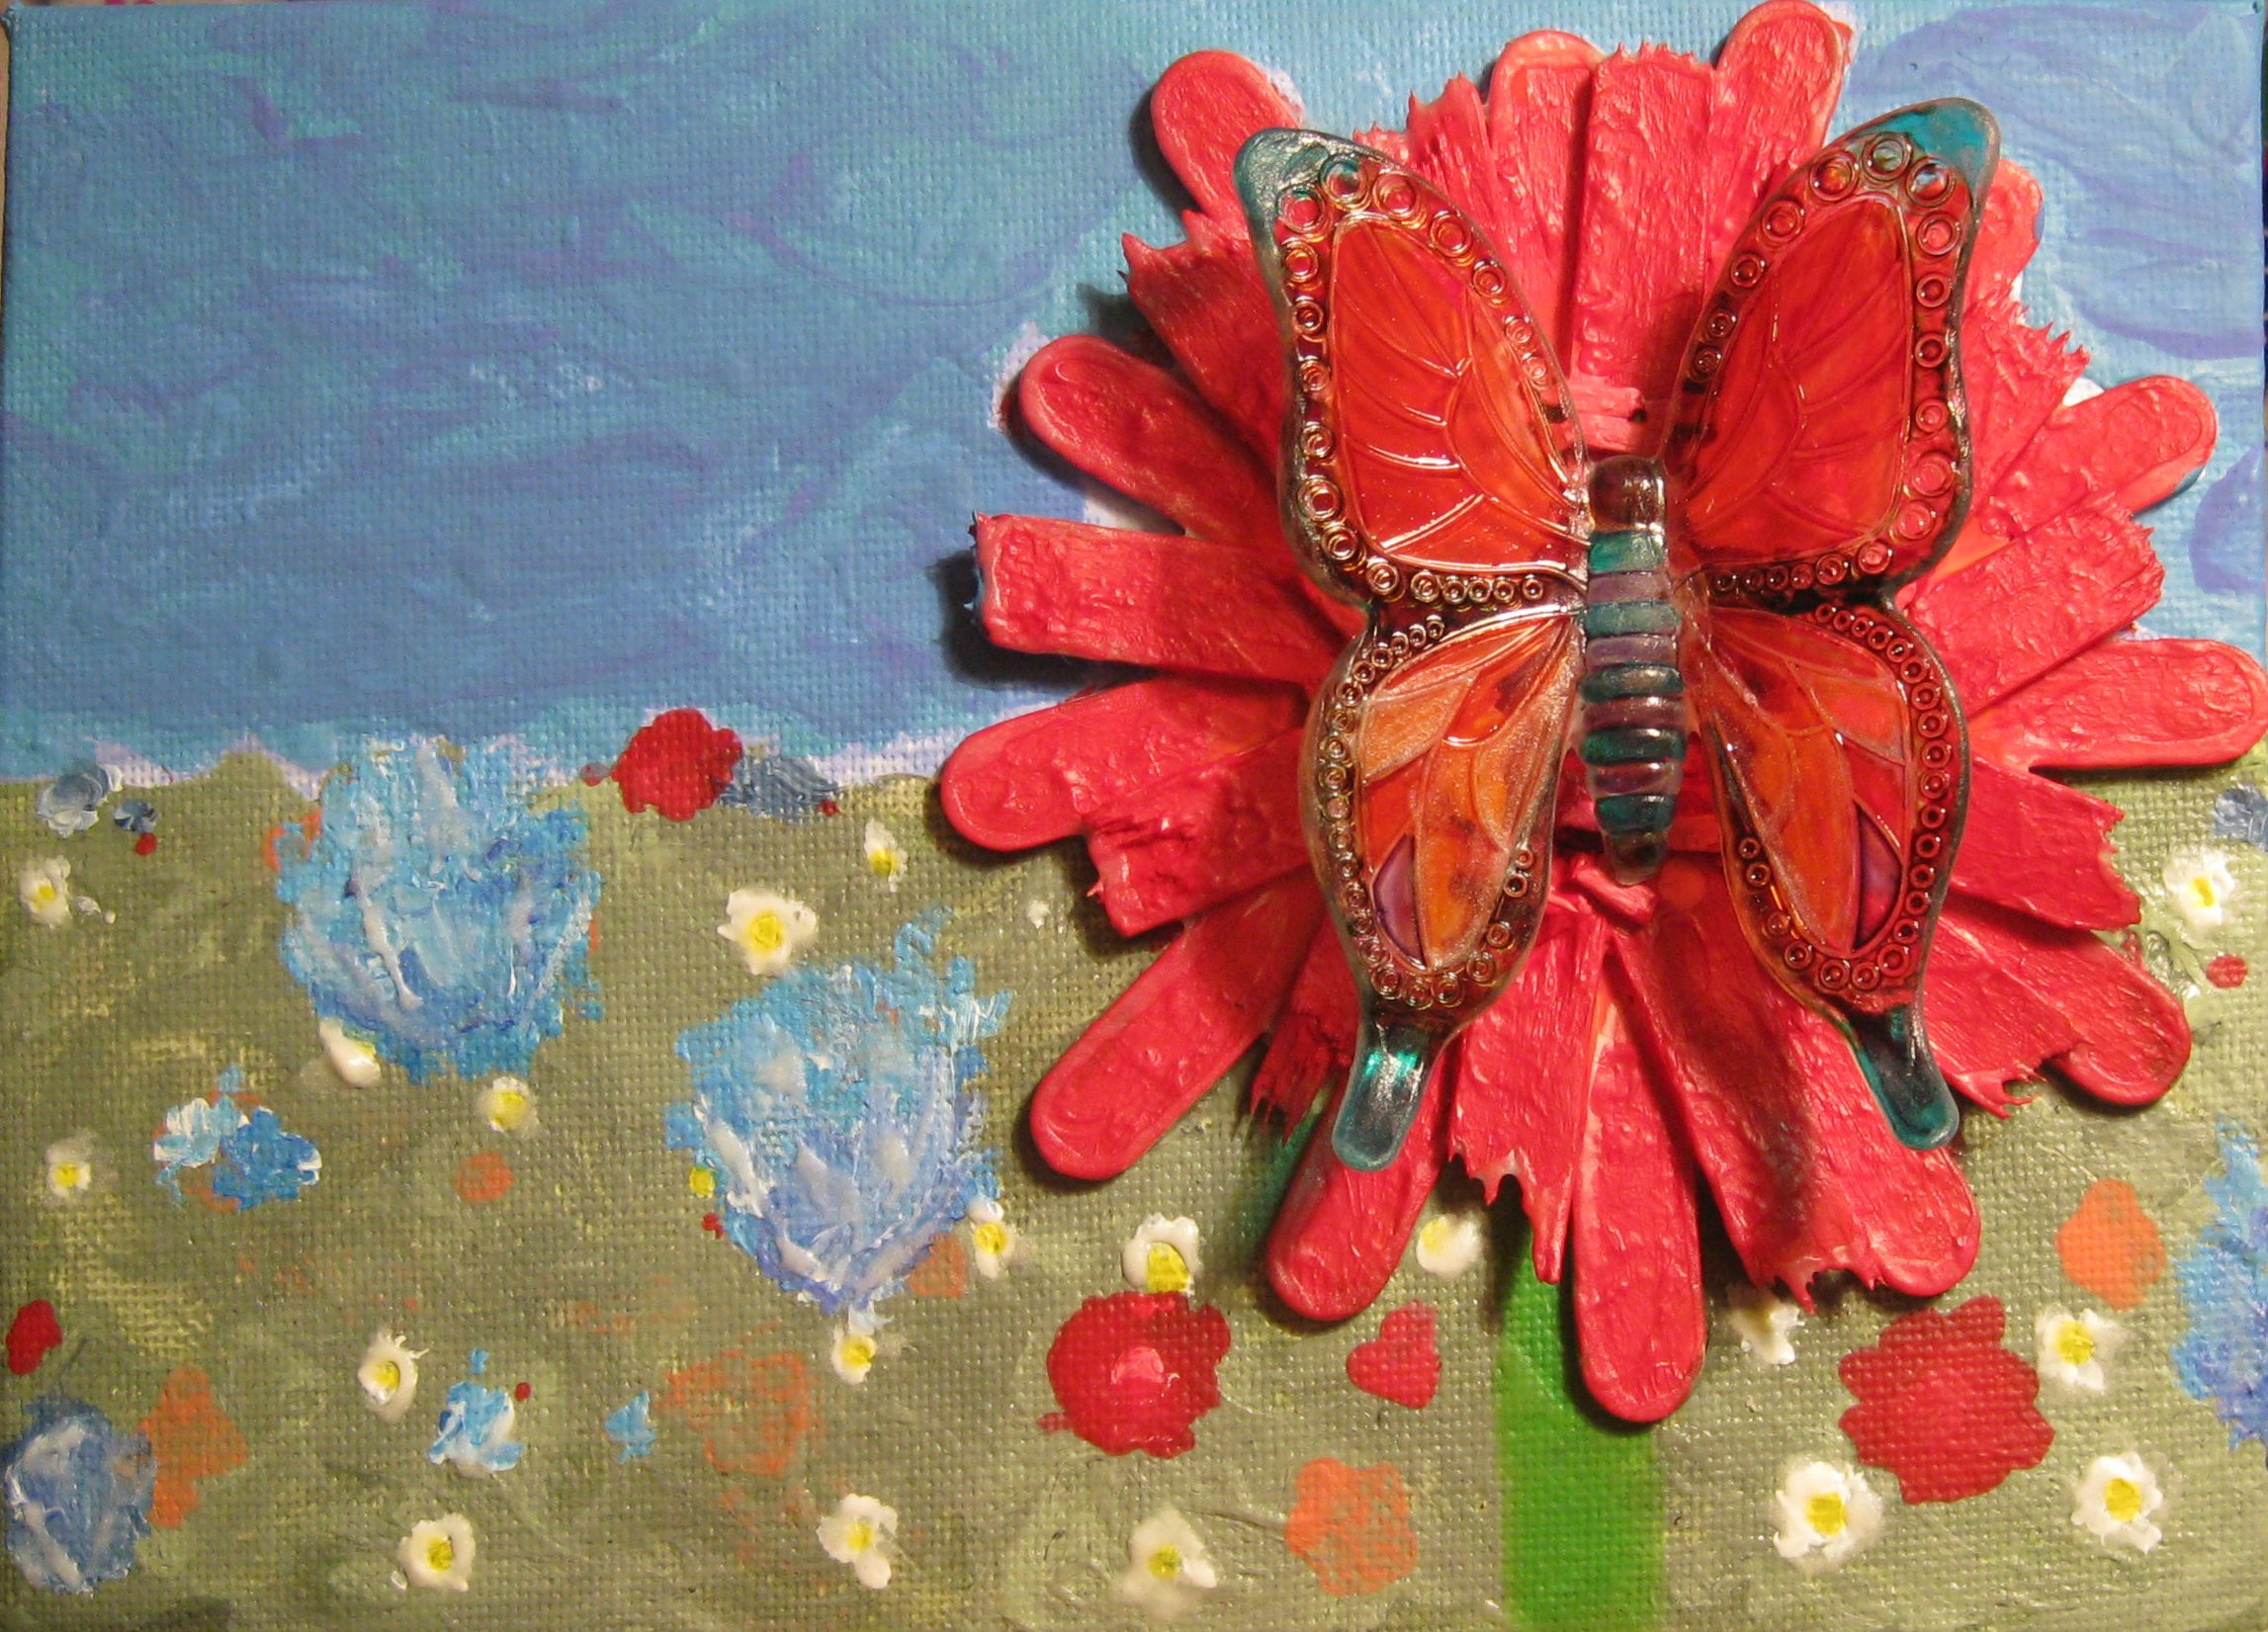 http://www.ivarch.com/blogs/rambling/2011/04/07/Flower%20and%20butterfly%20canvas%20-%20day.jpg